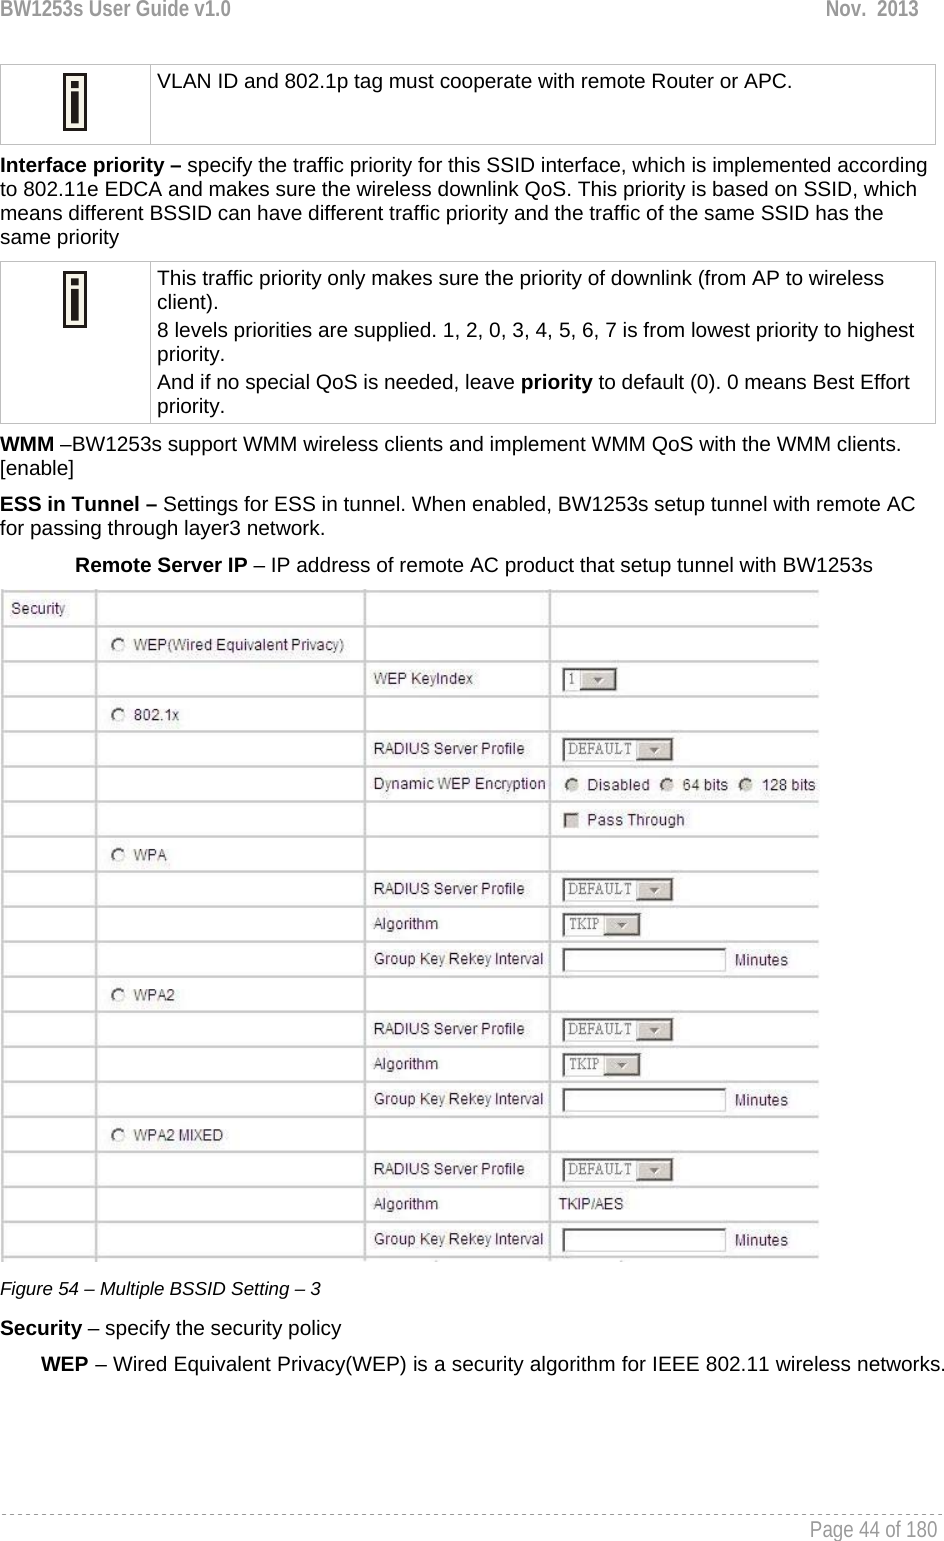 BW1253s User Guide v1.0  Nov.  2013     Page 44 of 180    VLAN ID and 802.1p tag must cooperate with remote Router or APC.  Interface priority – specify the traffic priority for this SSID interface, which is implemented according to 802.11e EDCA and makes sure the wireless downlink QoS. This priority is based on SSID, which means different BSSID can have different traffic priority and the traffic of the same SSID has the same priority  This traffic priority only makes sure the priority of downlink (from AP to wireless client). 8 levels priorities are supplied. 1, 2, 0, 3, 4, 5, 6, 7 is from lowest priority to highest priority.  And if no special QoS is needed, leave priority to default (0). 0 means Best Effort priority.  WMM –BW1253s support WMM wireless clients and implement WMM QoS with the WMM clients. [enable] ESS in Tunnel – Settings for ESS in tunnel. When enabled, BW1253s setup tunnel with remote AC for passing through layer3 network.  Remote Server IP – IP address of remote AC product that setup tunnel with BW1253s  Figure 54 – Multiple BSSID Setting – 3 Security – specify the security policy WEP – Wired Equivalent Privacy(WEP) is a security algorithm for IEEE 802.11 wireless networks. 